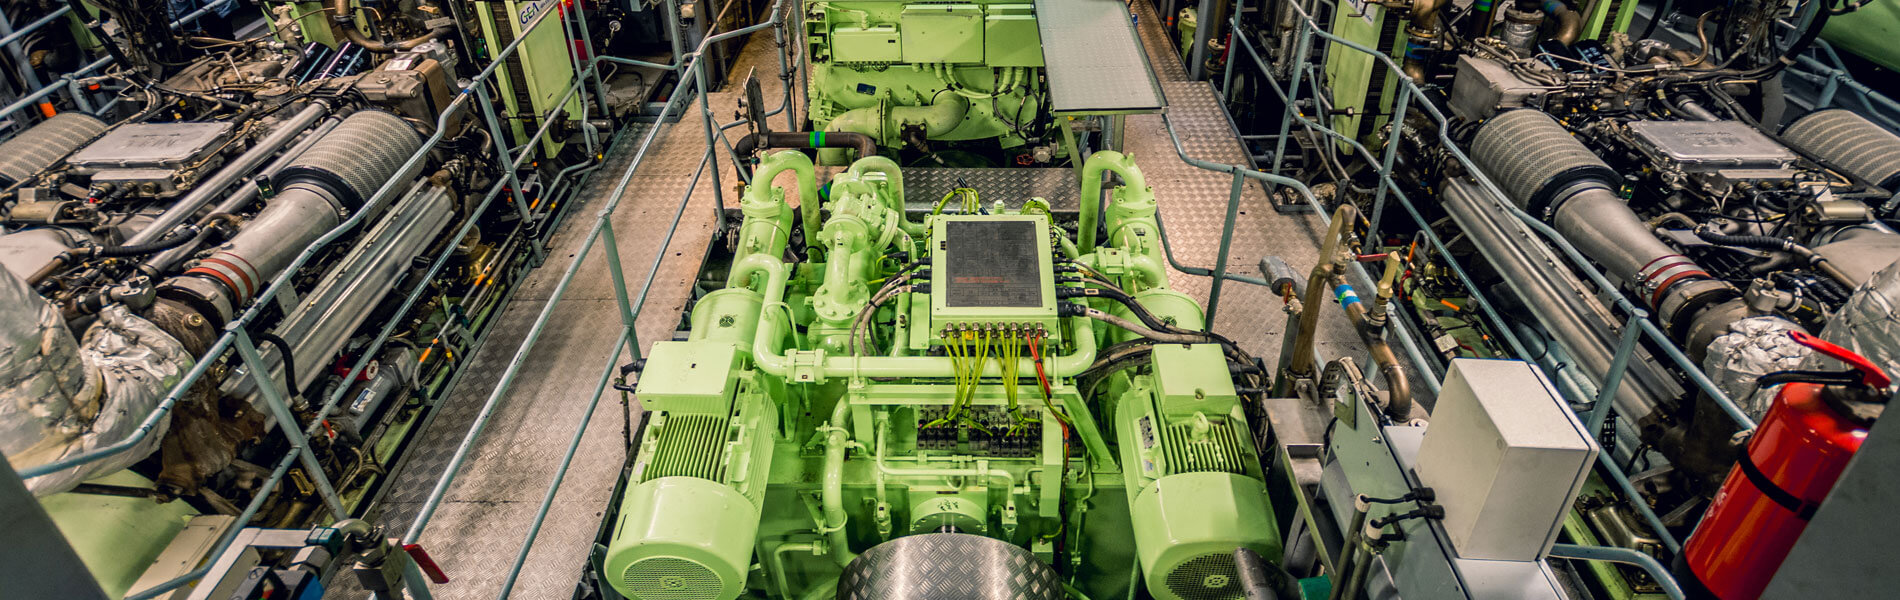 Industrial green ship's engine room